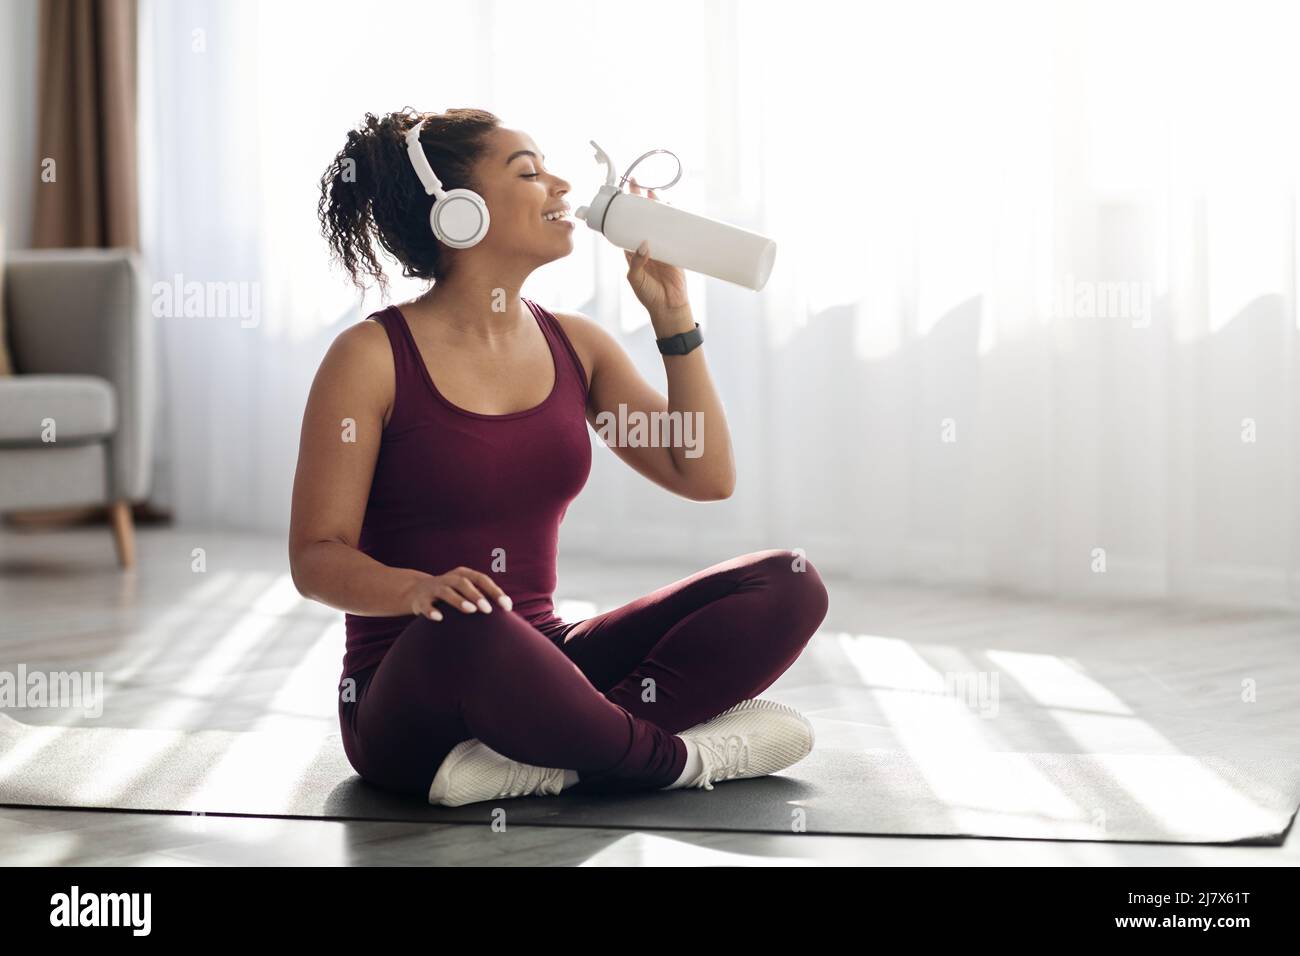 Athletic black woman drinking water while exercising Stock Photo